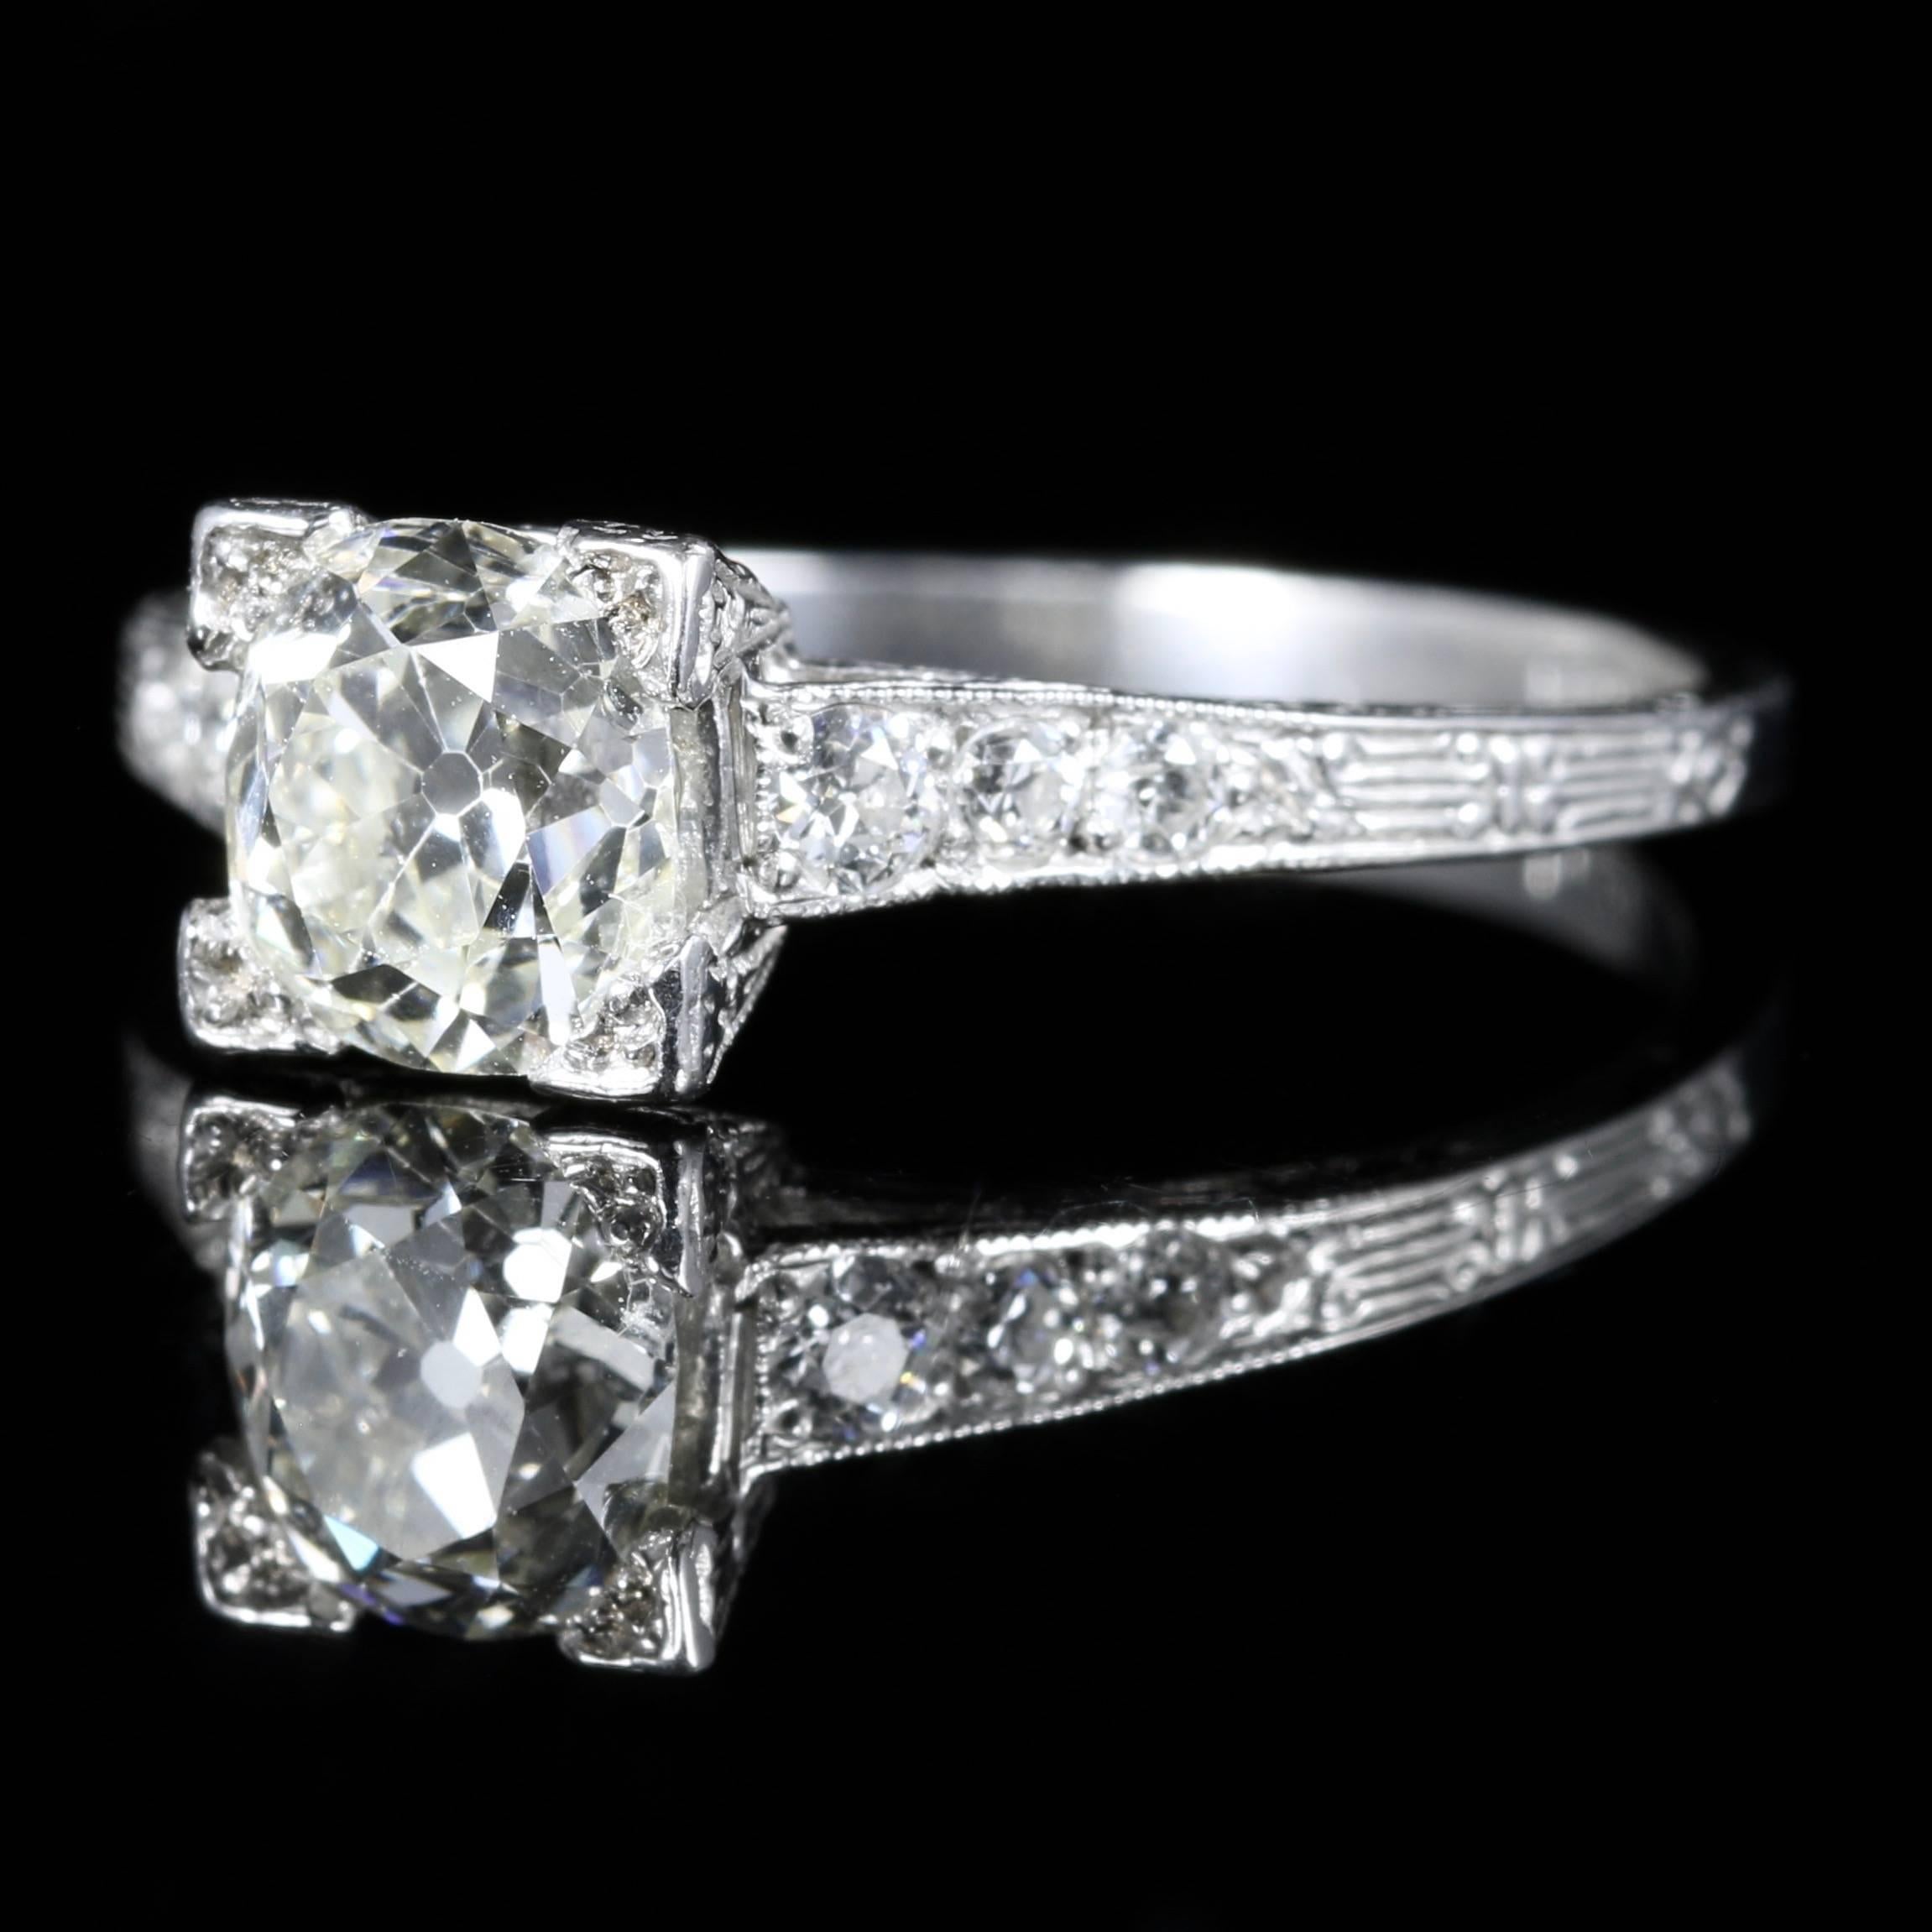 For more details please click continue reading down below...

This fabulous all original Art Deco 18ct White Gold ring is set with a lovely old cut bright white Diamond.

Smaller Diamonds are set into the shoulders of this ring, followed by